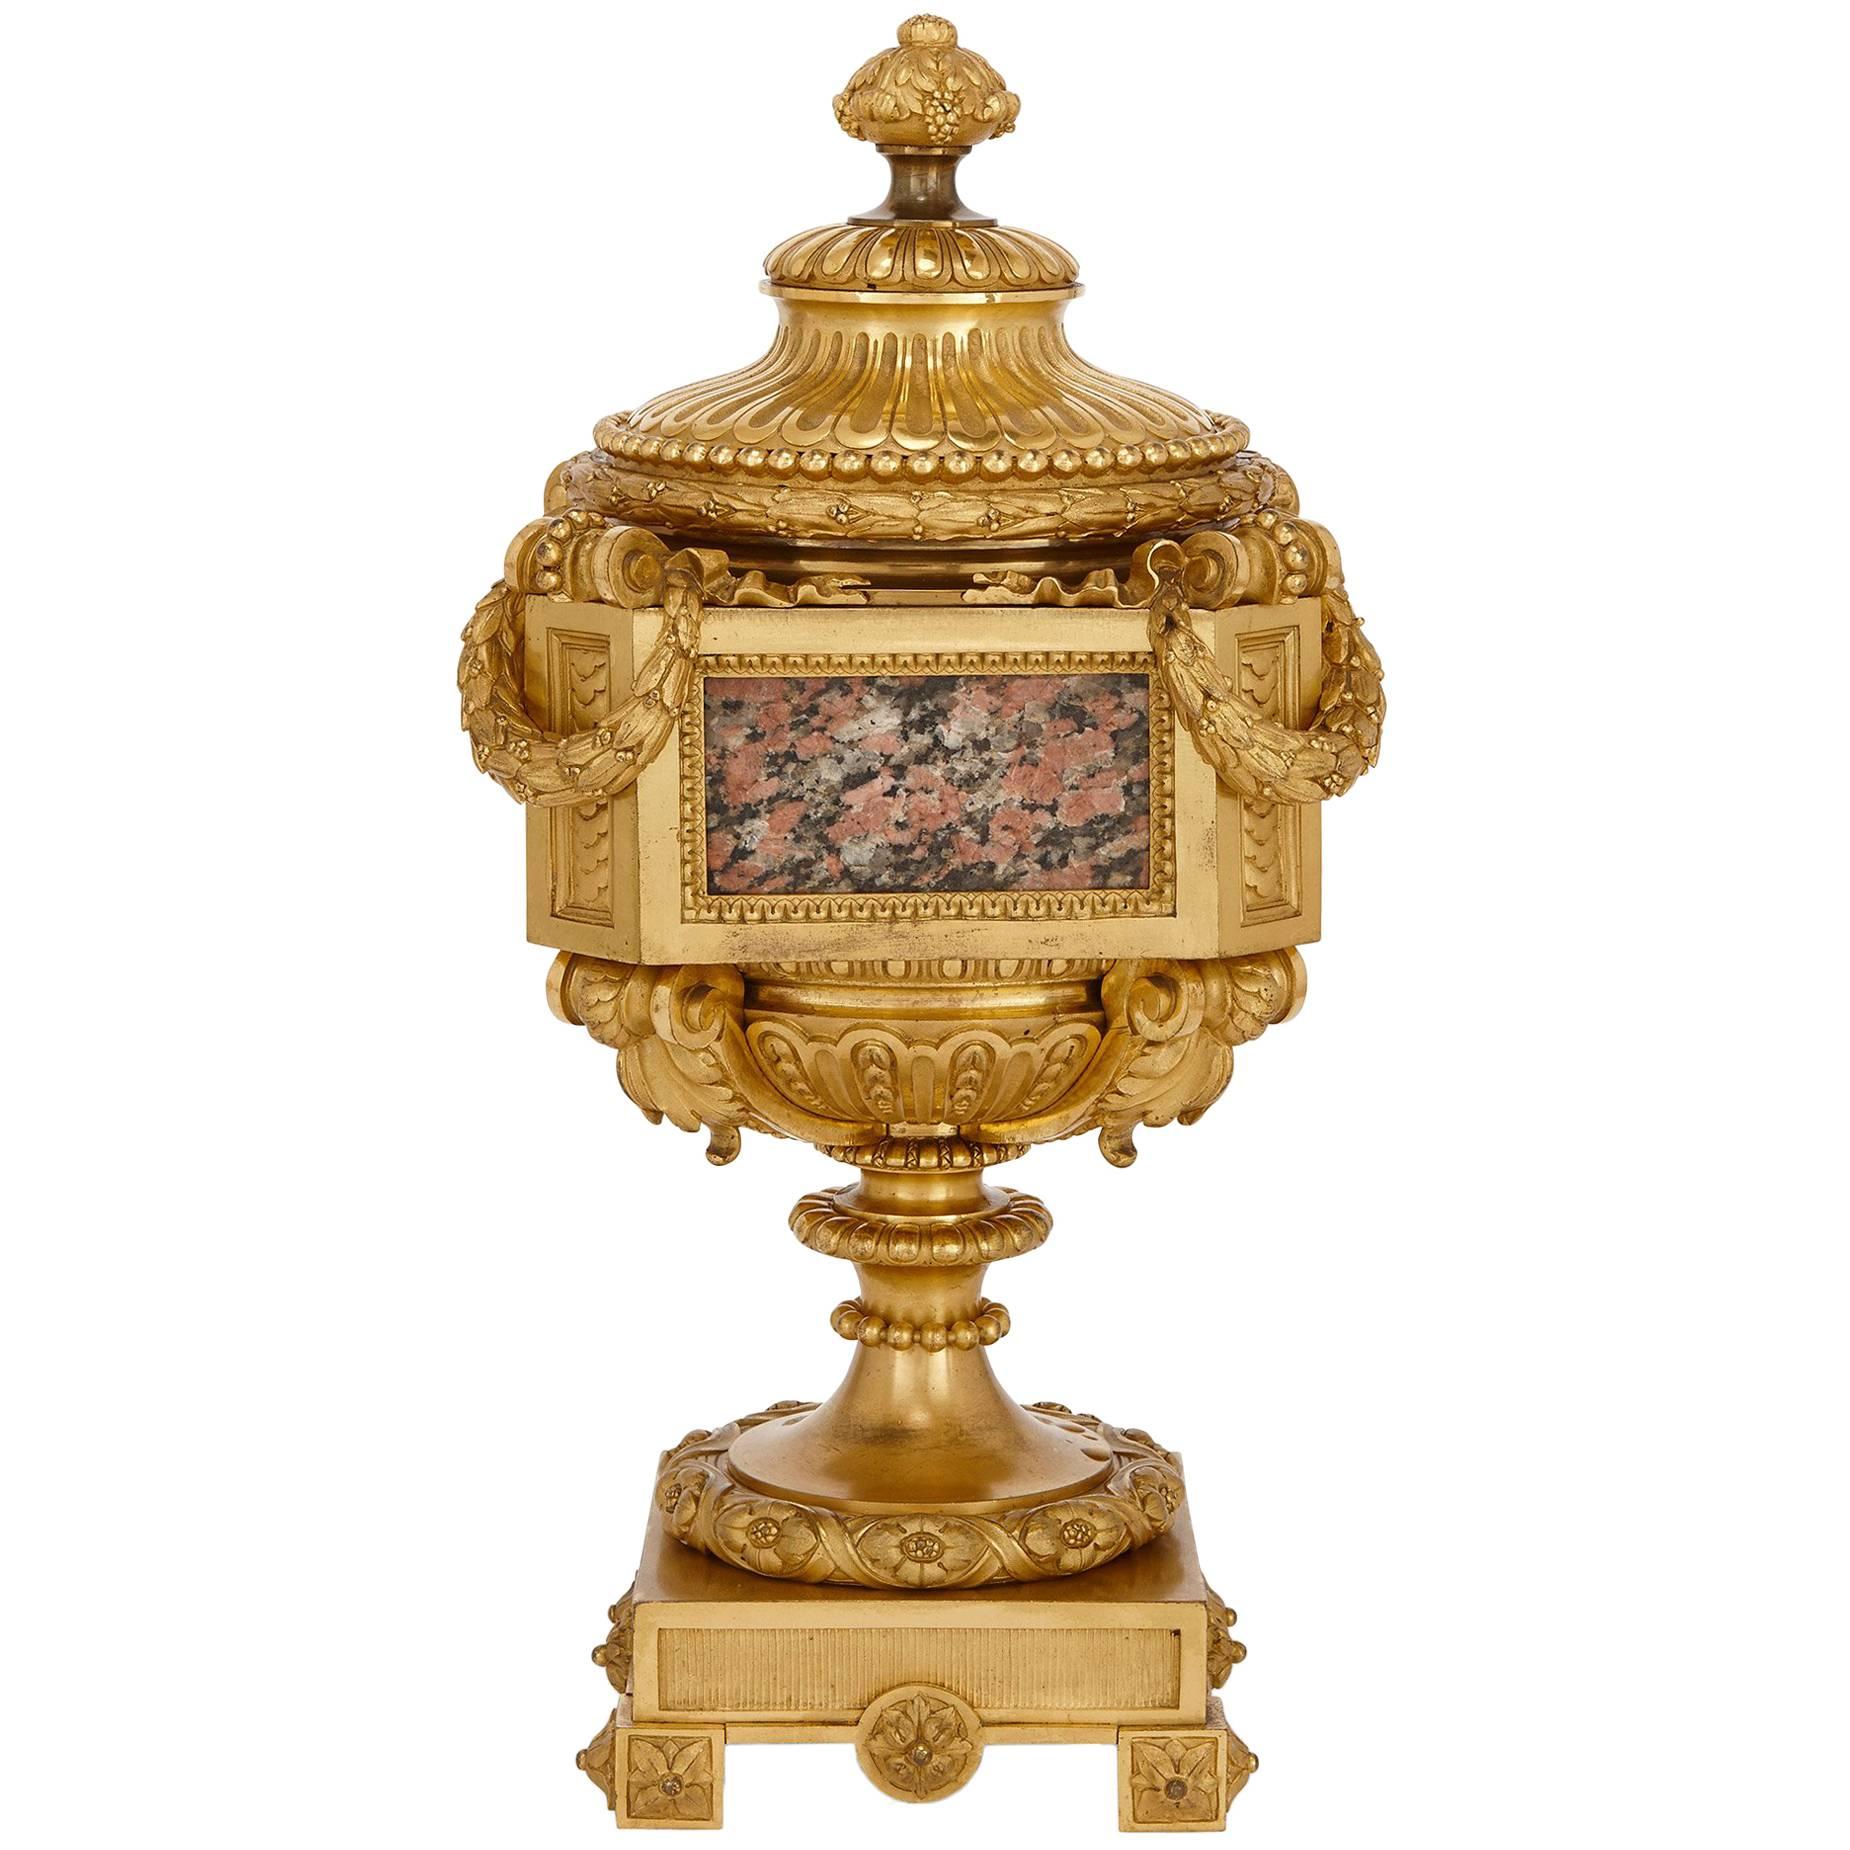 Neoclassical Style Marble Mounted Ormolu Antique Vase Attributed to Picard